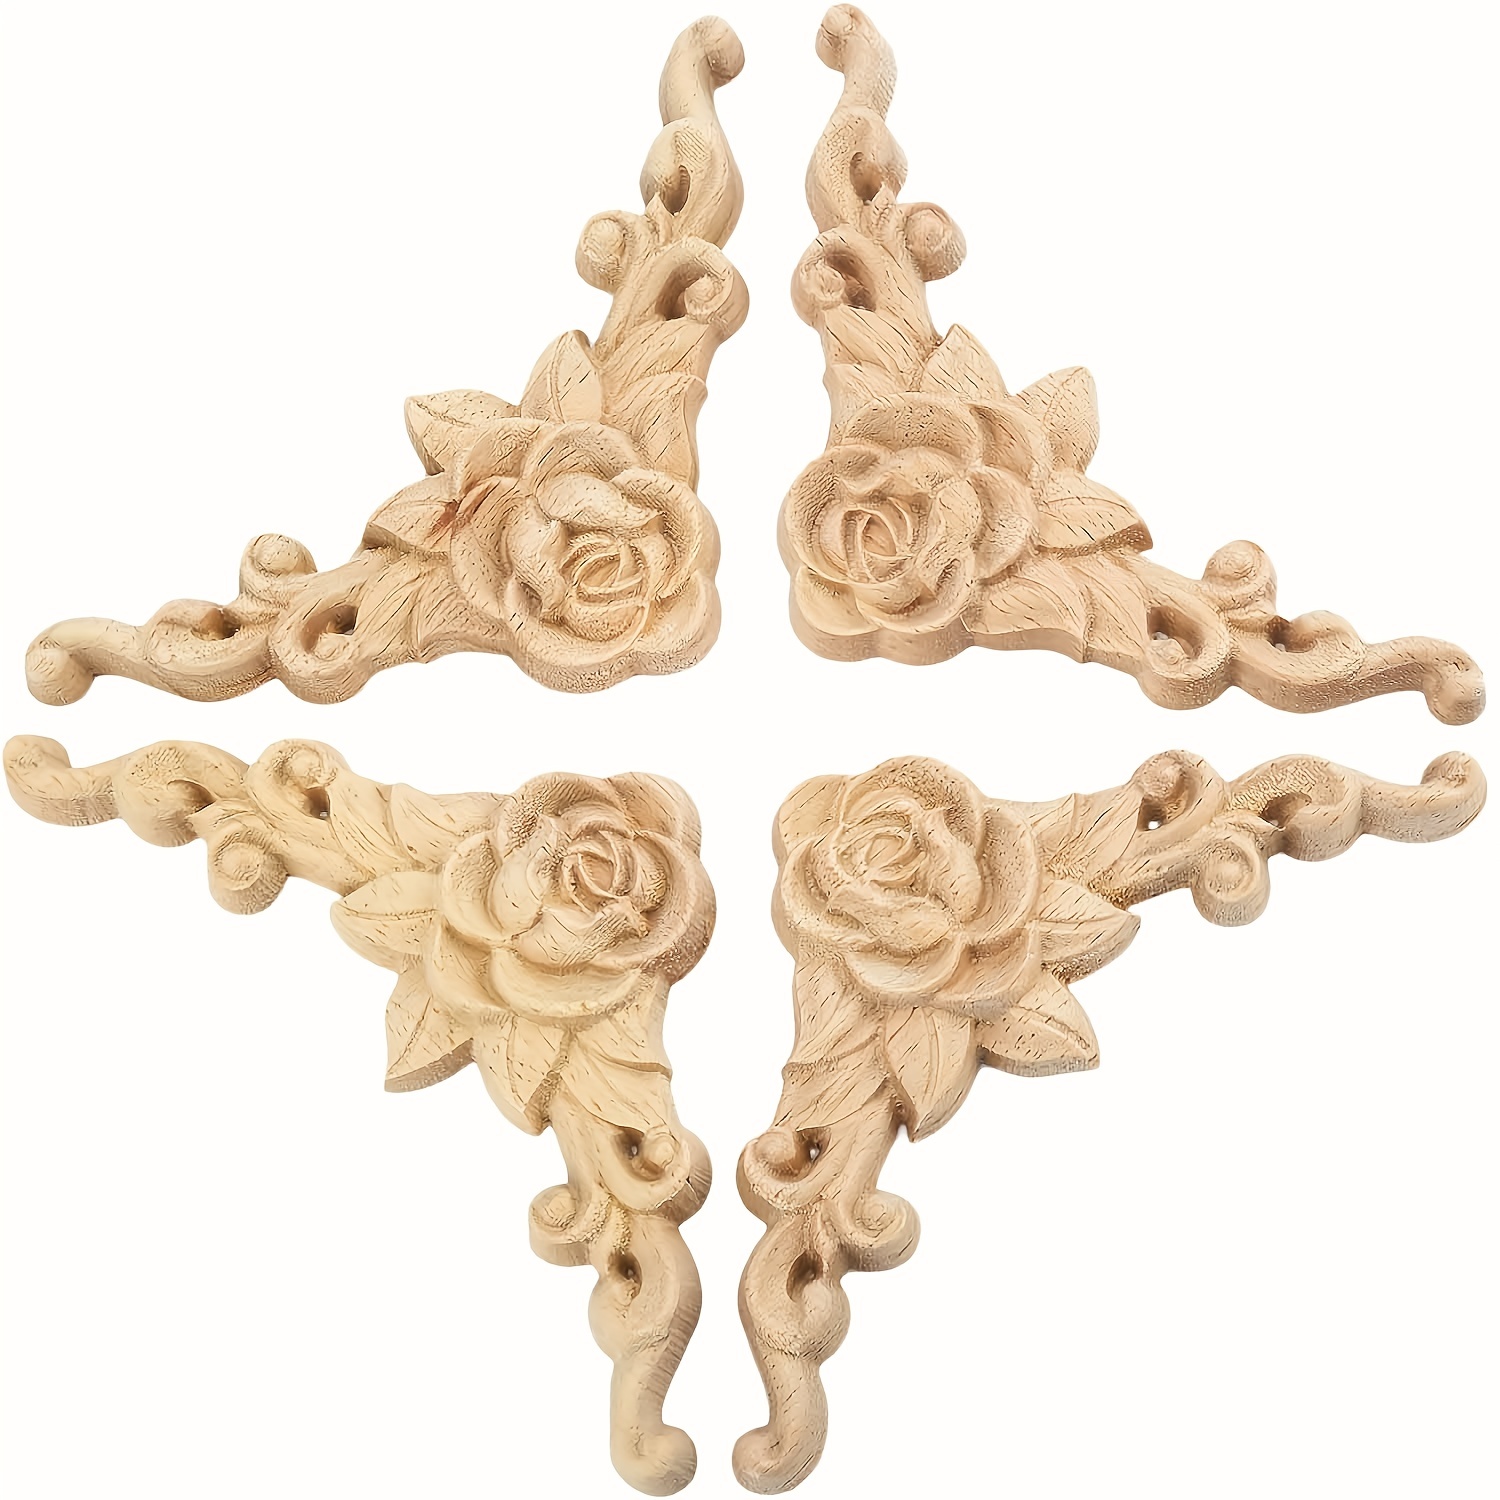 

4pcs Wood Appliques & Onlays For Furniture, 3.15" X 3.15"(8x8cm), Handmade Carved Unpainted Corner Decoration For Home Wall Door Bed Cabinet Cupboard Funiture Door Cabinet Retro Rose Pattern